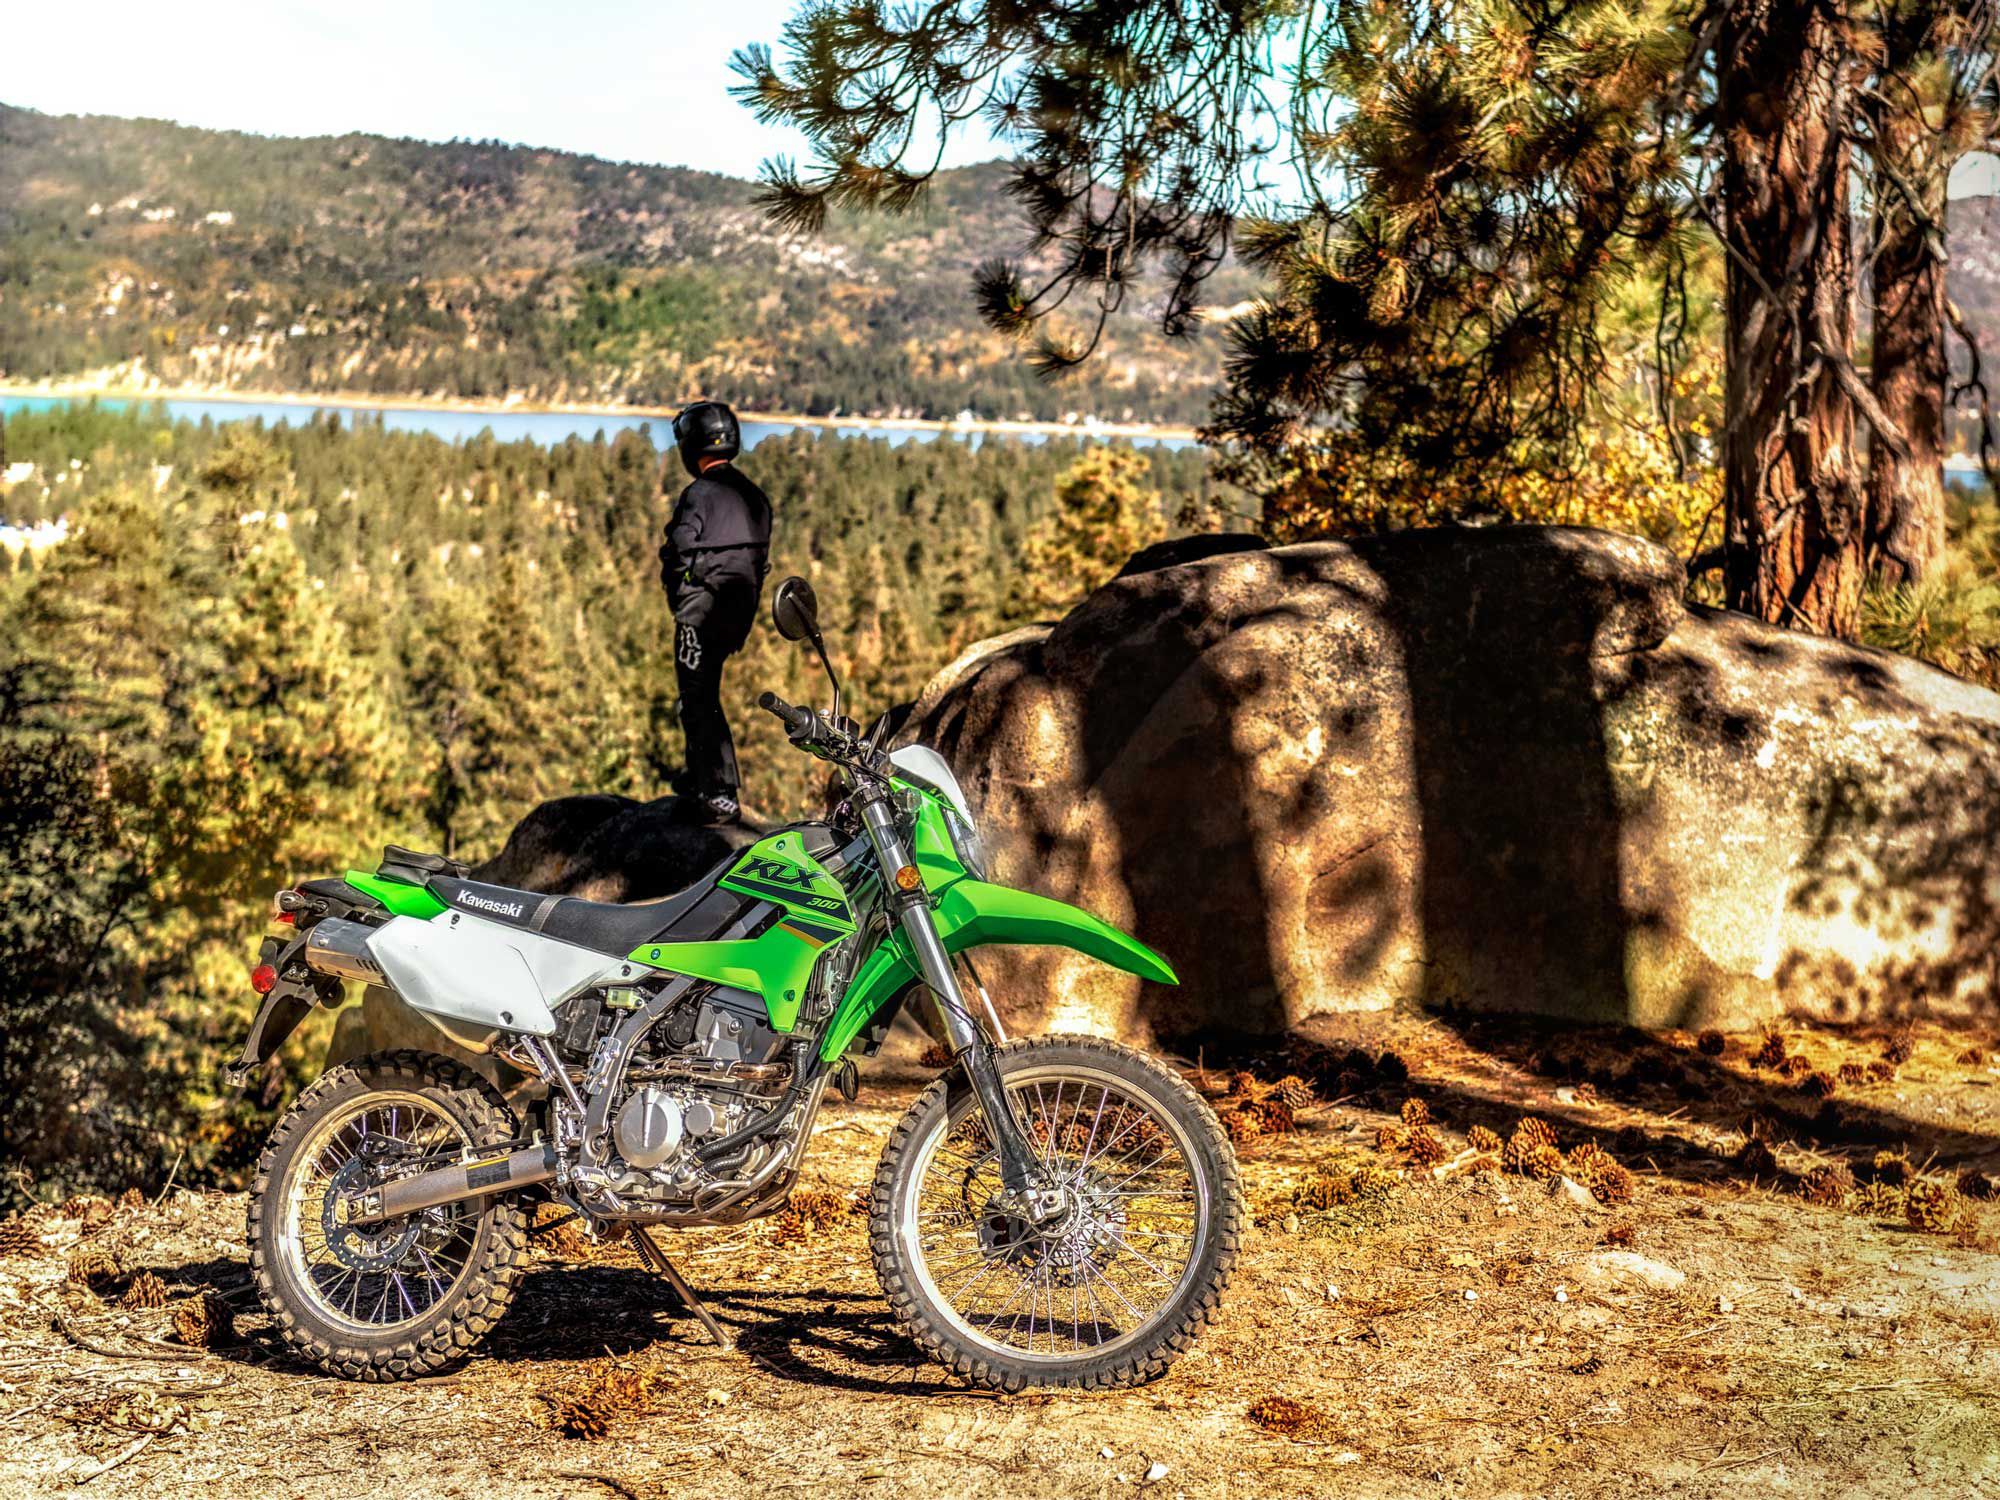 The KLX300 has great trail manners when ridden at a casual pace, making it a fun, user-friendly bike for navigating city streets or exploring local trails.